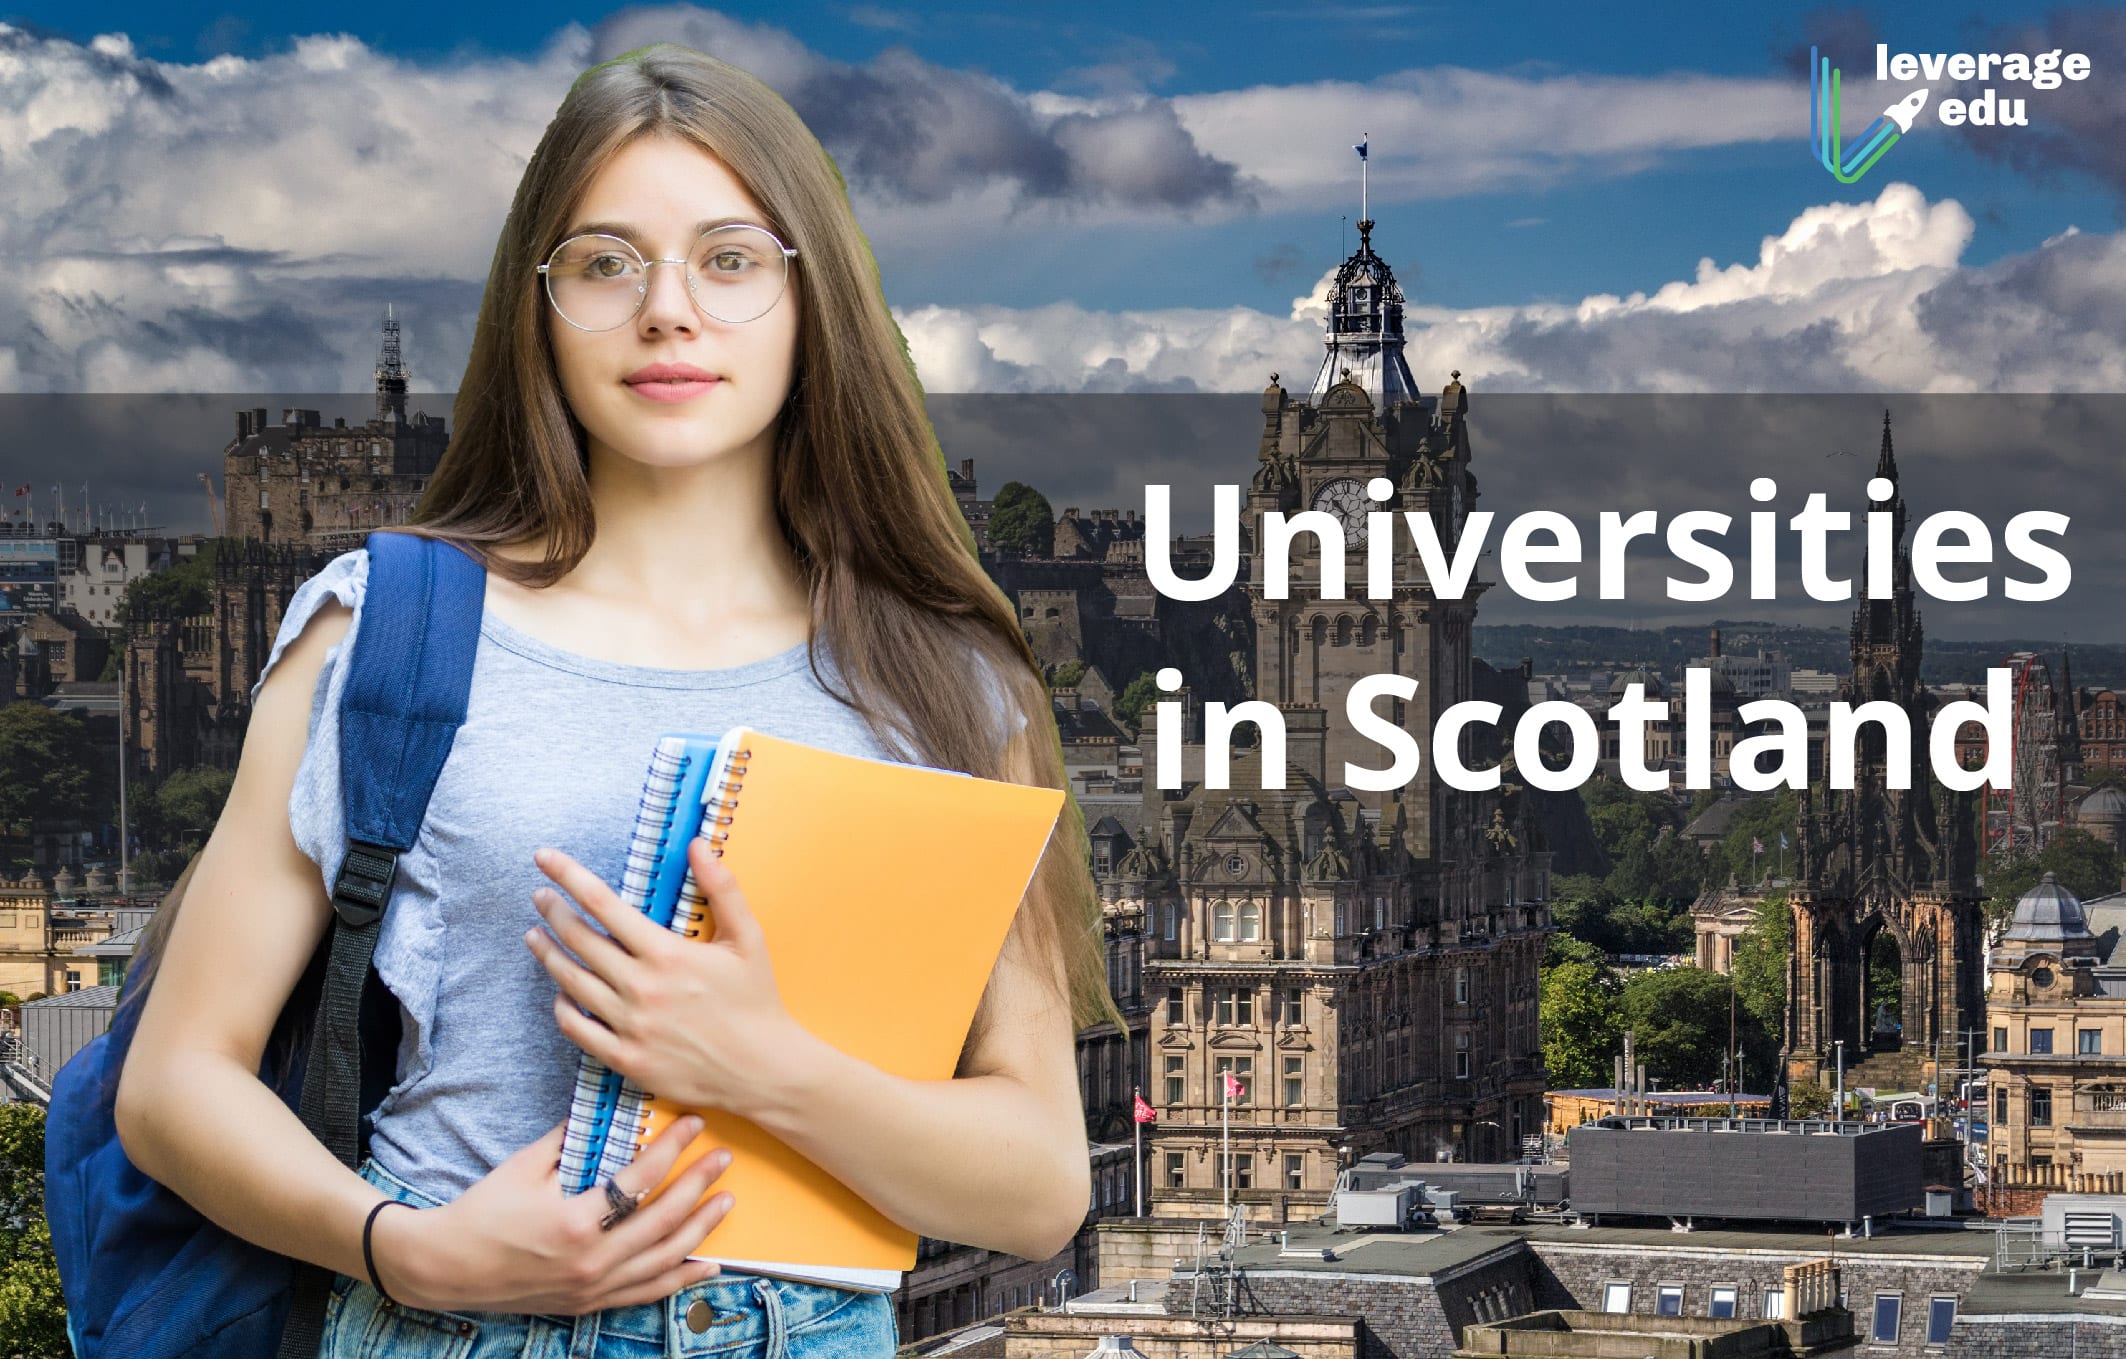 agriculture phd scholarships in scotland